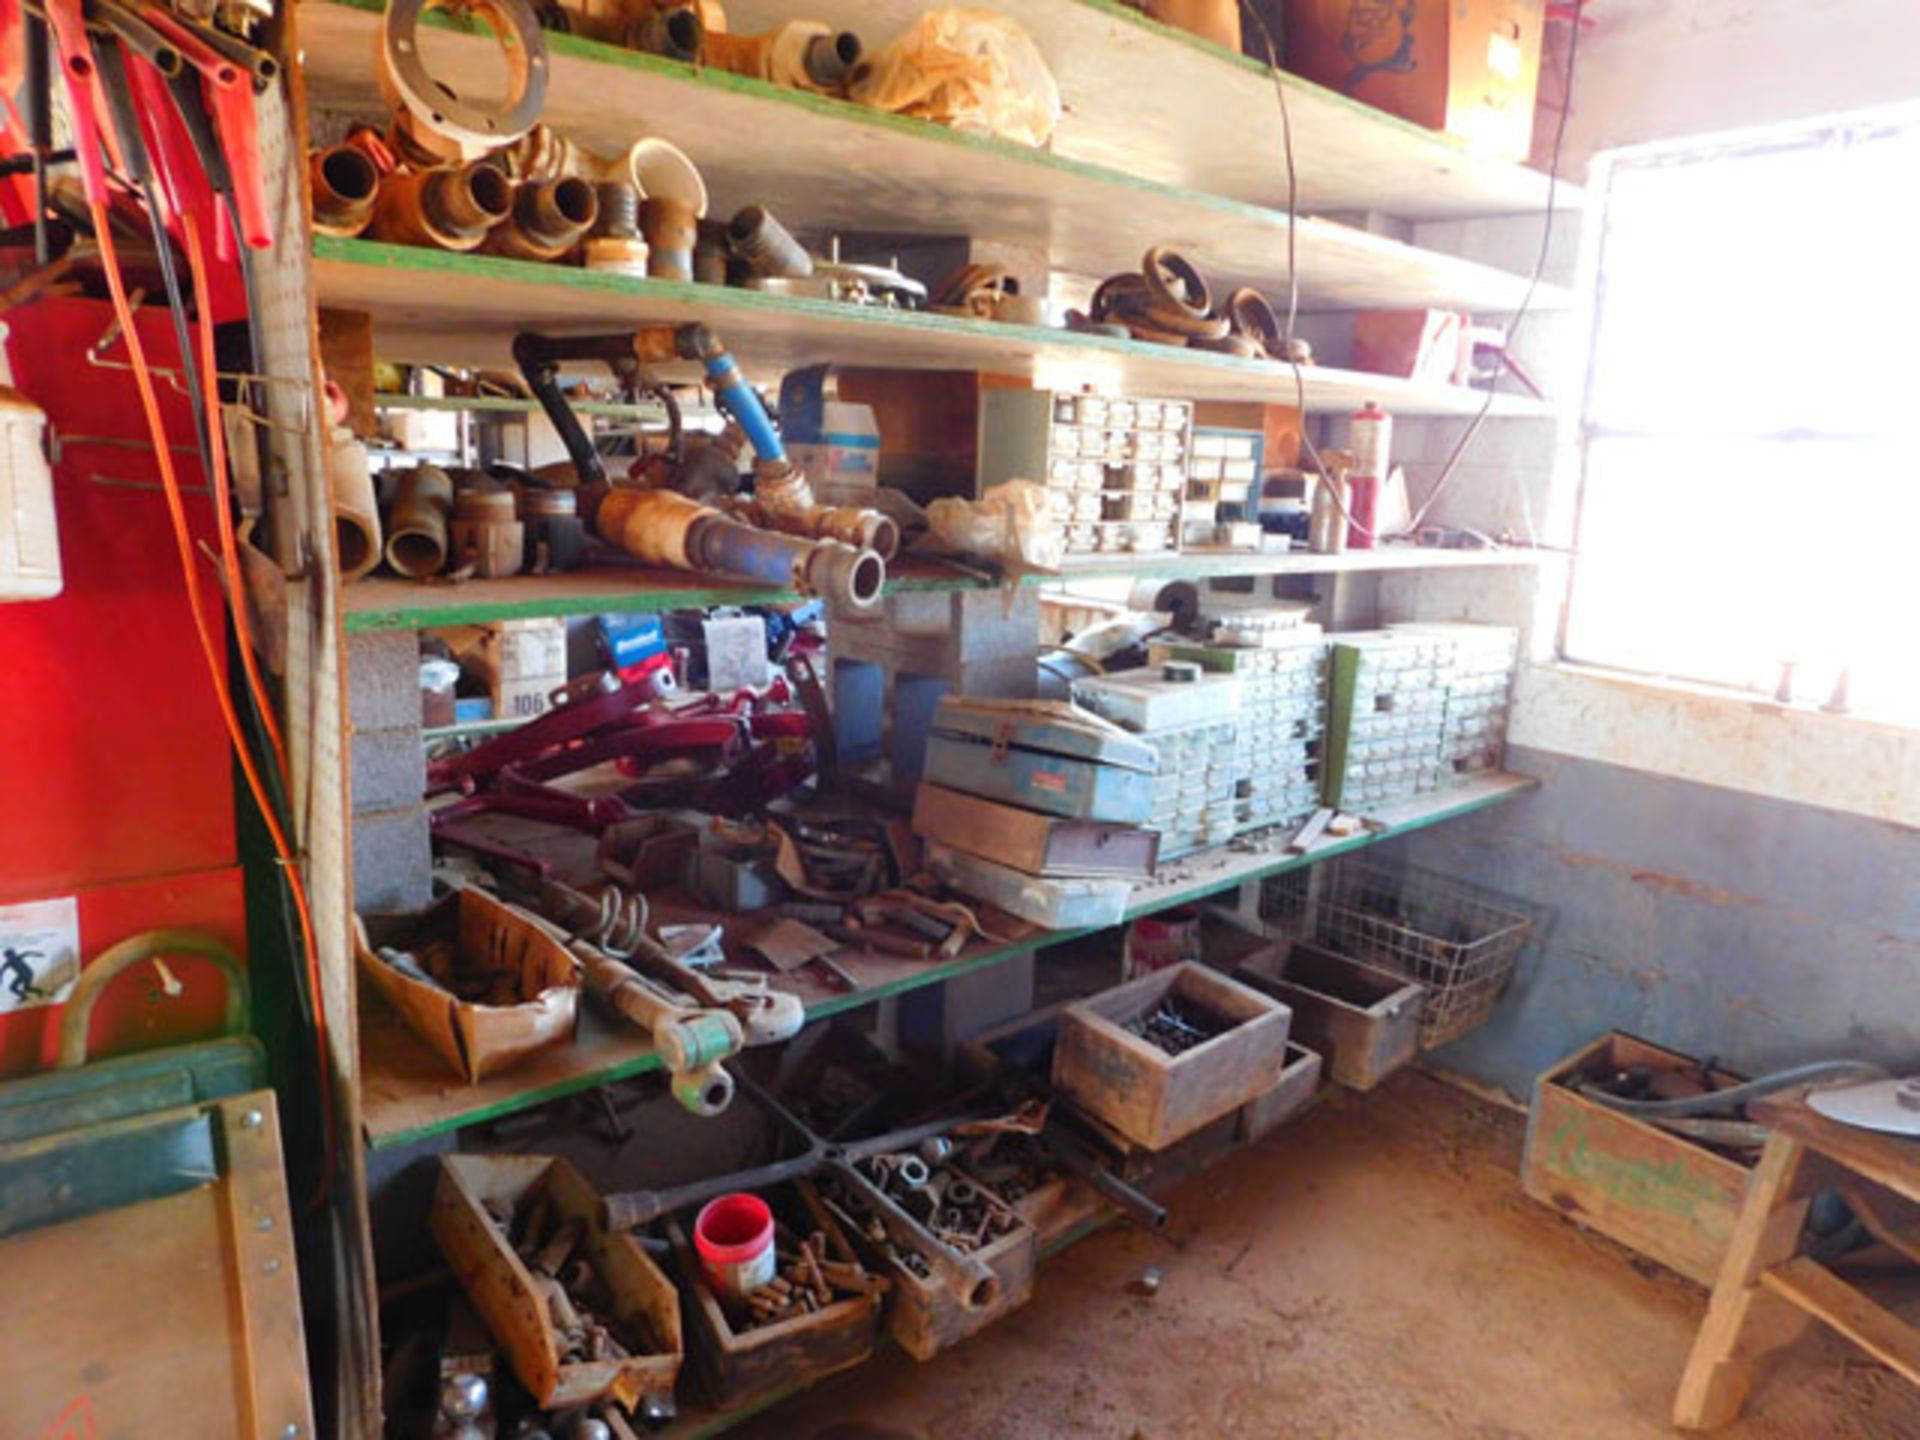 Remaining content of shop barn to include: spare parts, shop tools, shelving, bolt bins, hand tools, - Image 3 of 4